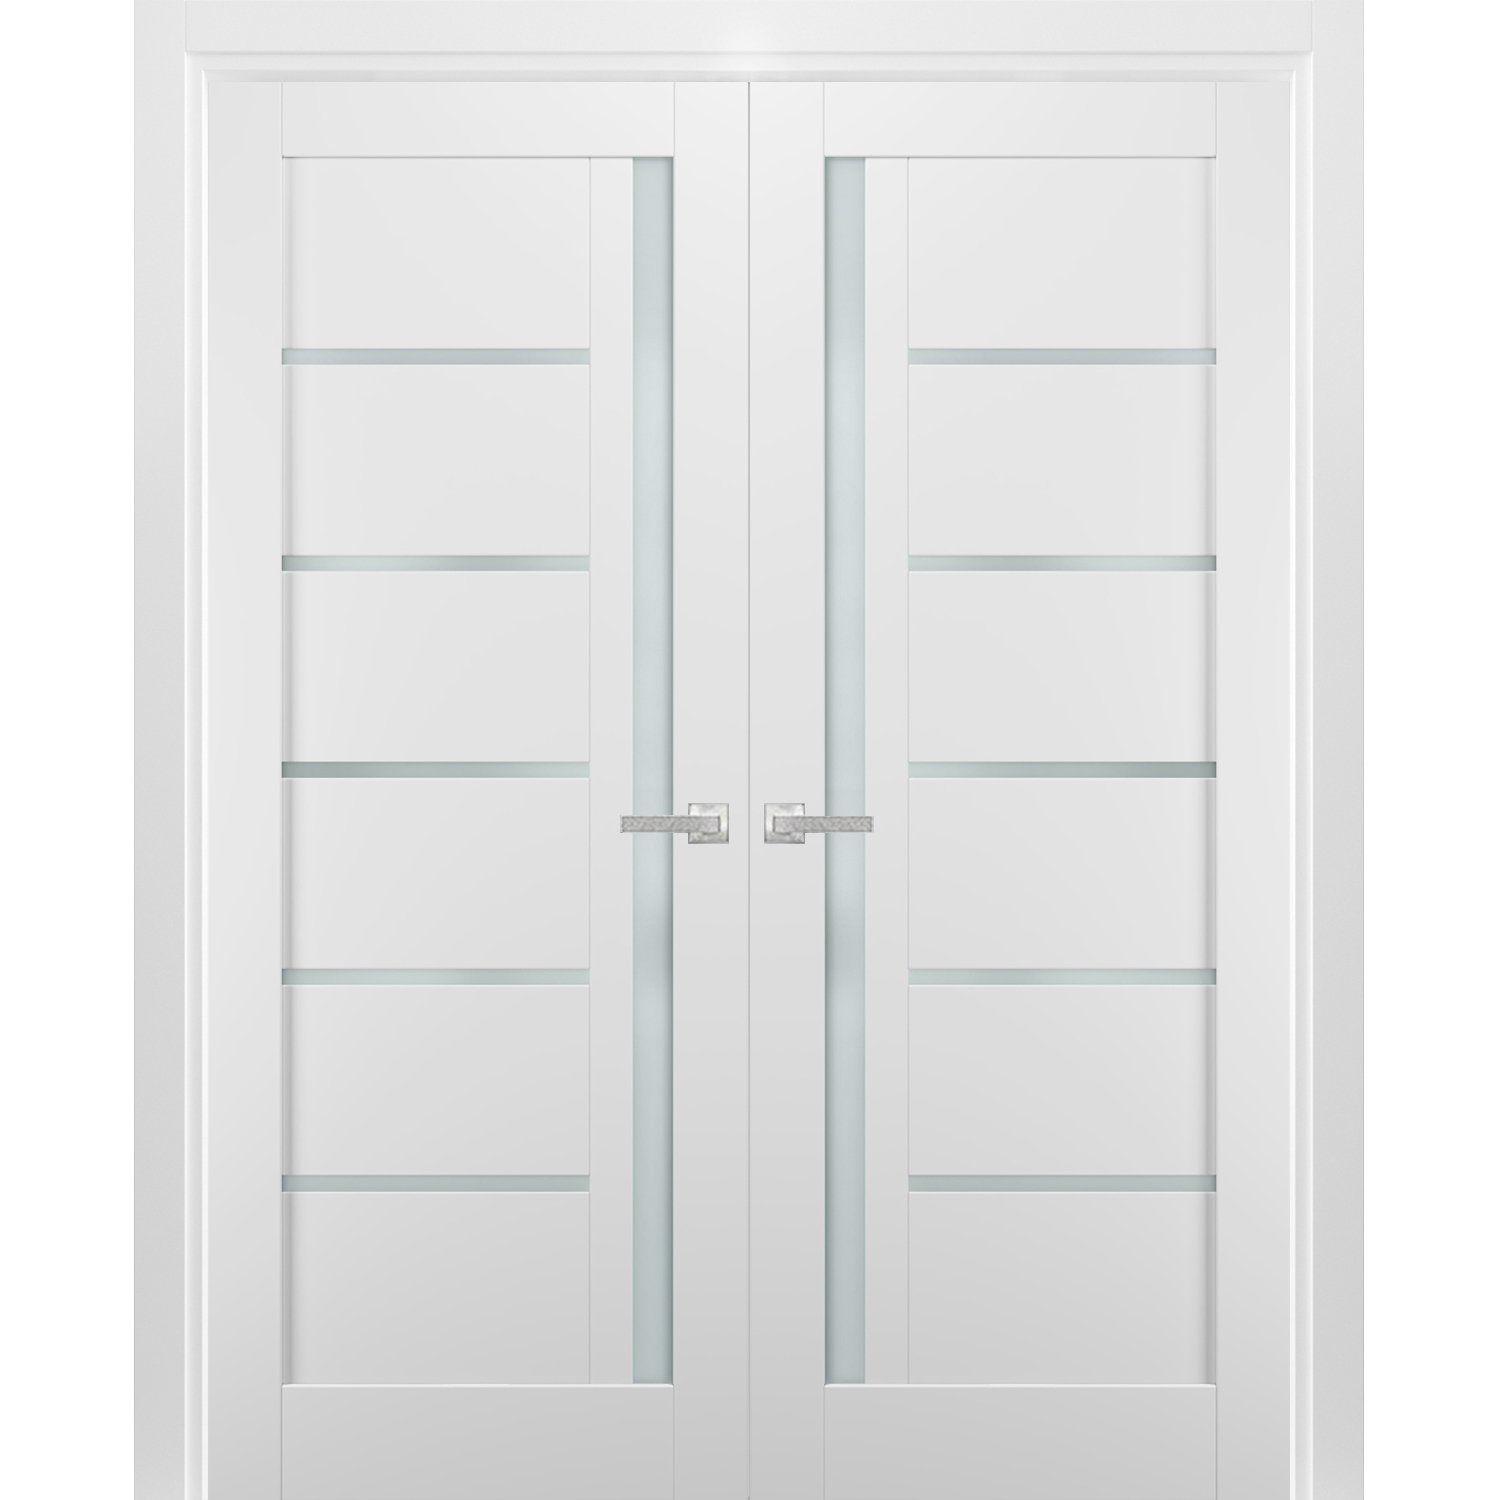 French Double Panel Lite Doors with Hardware | Quadro 4088 White Silk with Frosted Opaque Glass | Panel Frame Trims | Bathroom Bedroom Interior Sturdy Door-48